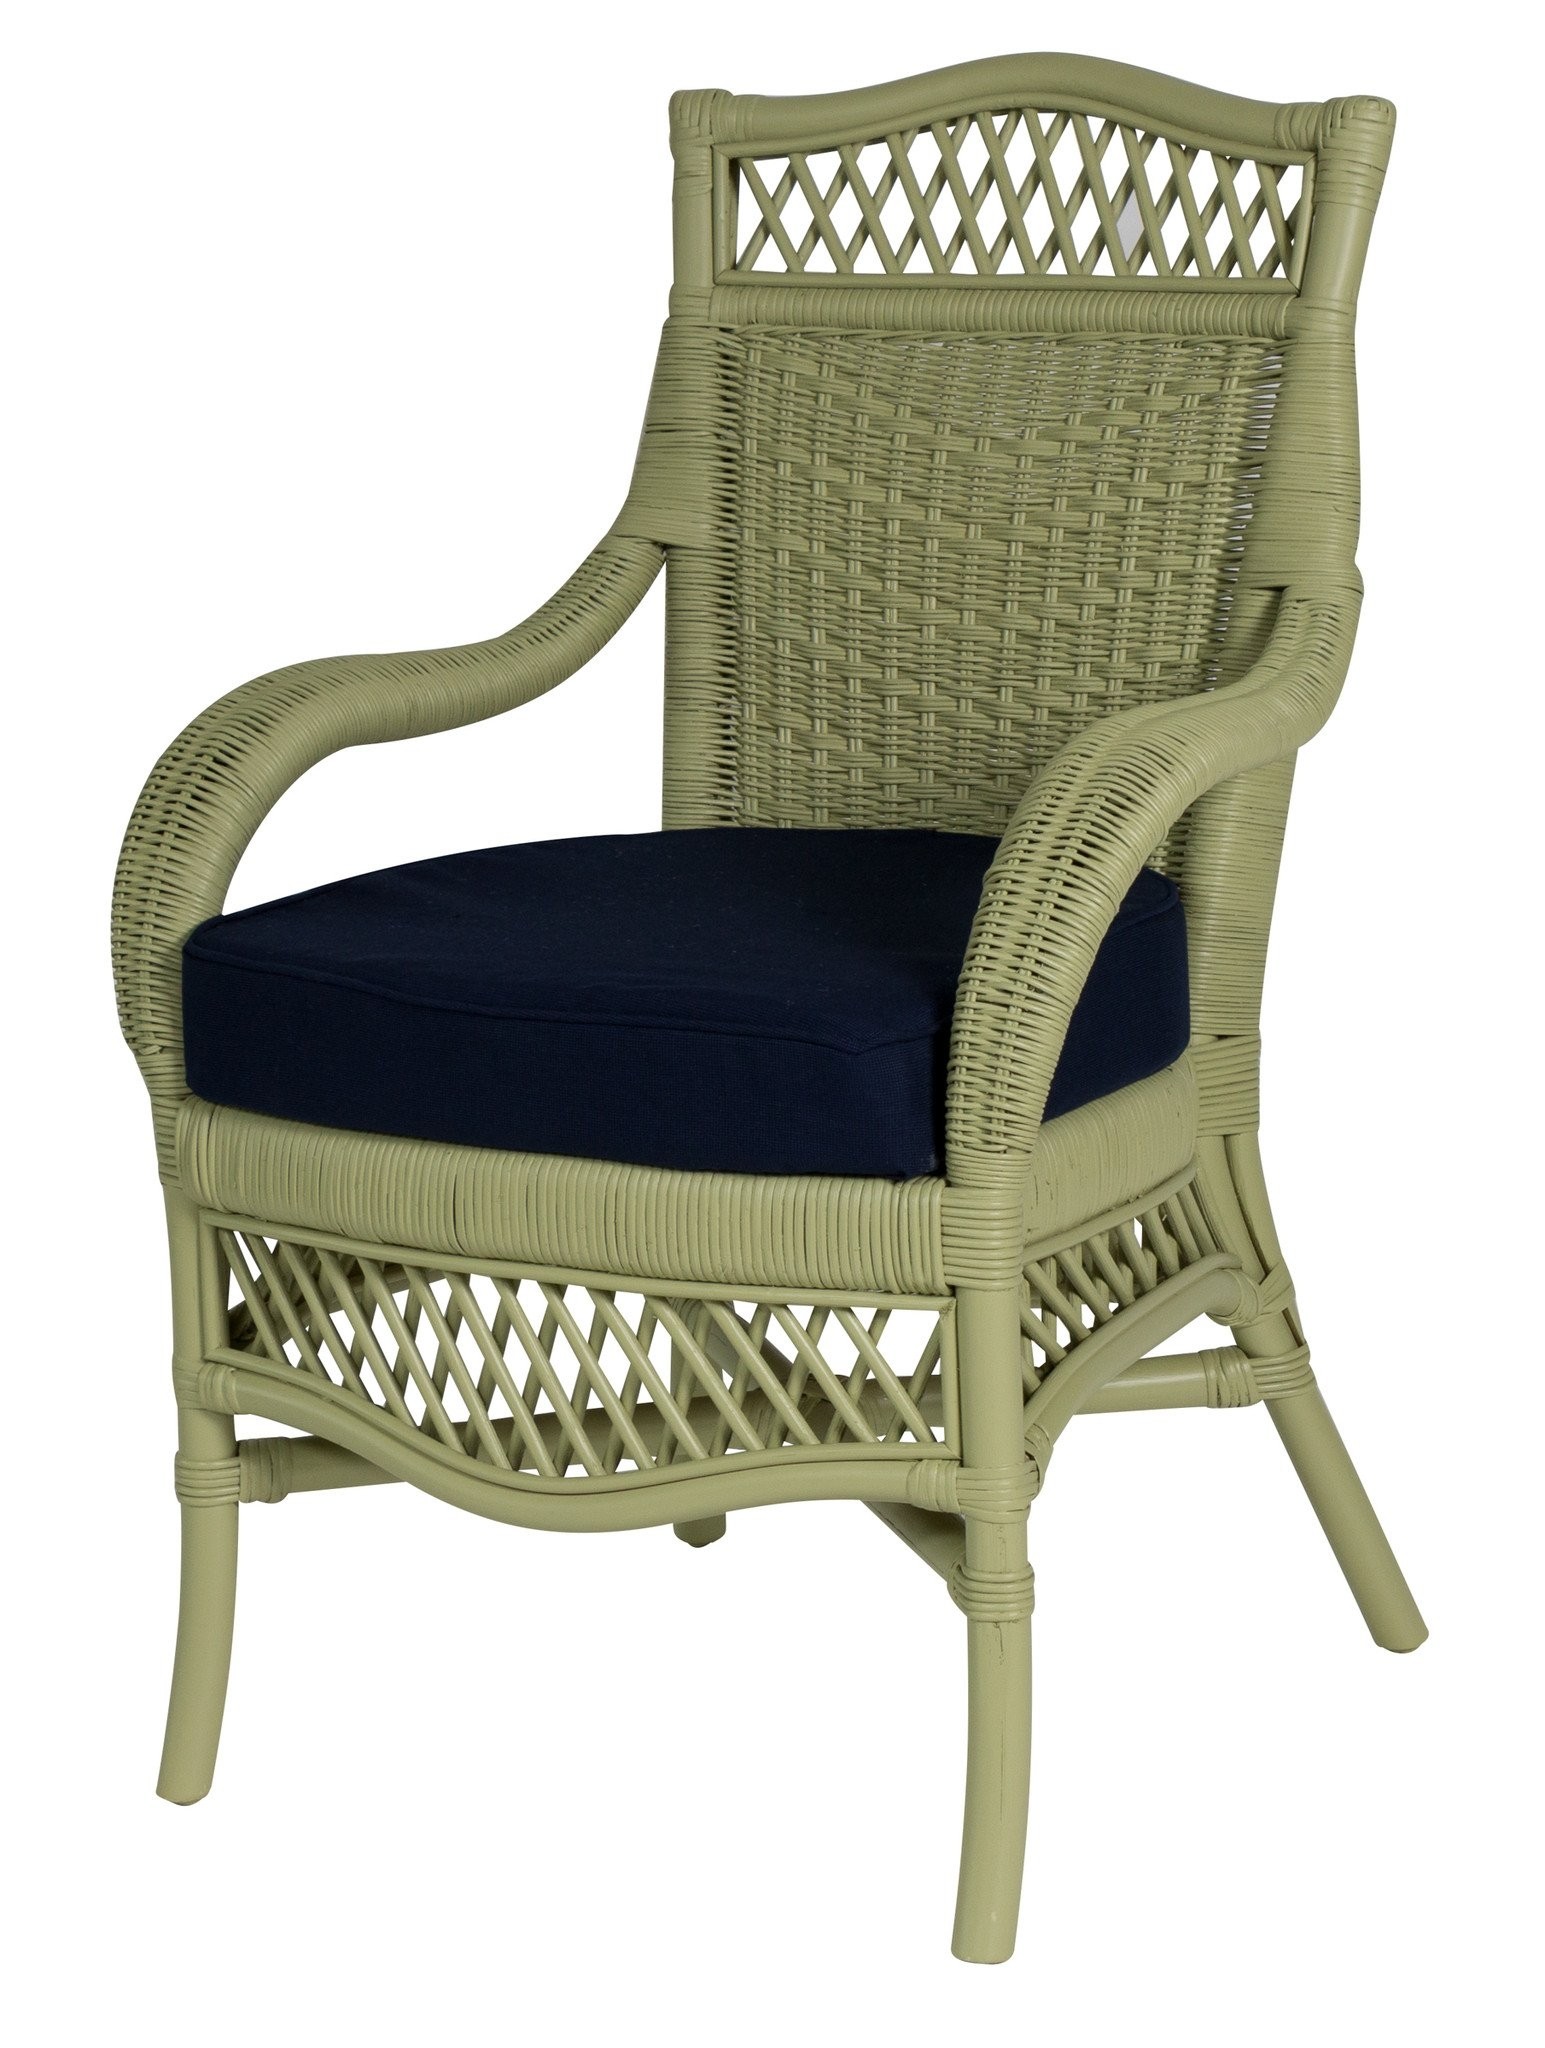 Plantation dining arm chair designer wicker by tribor